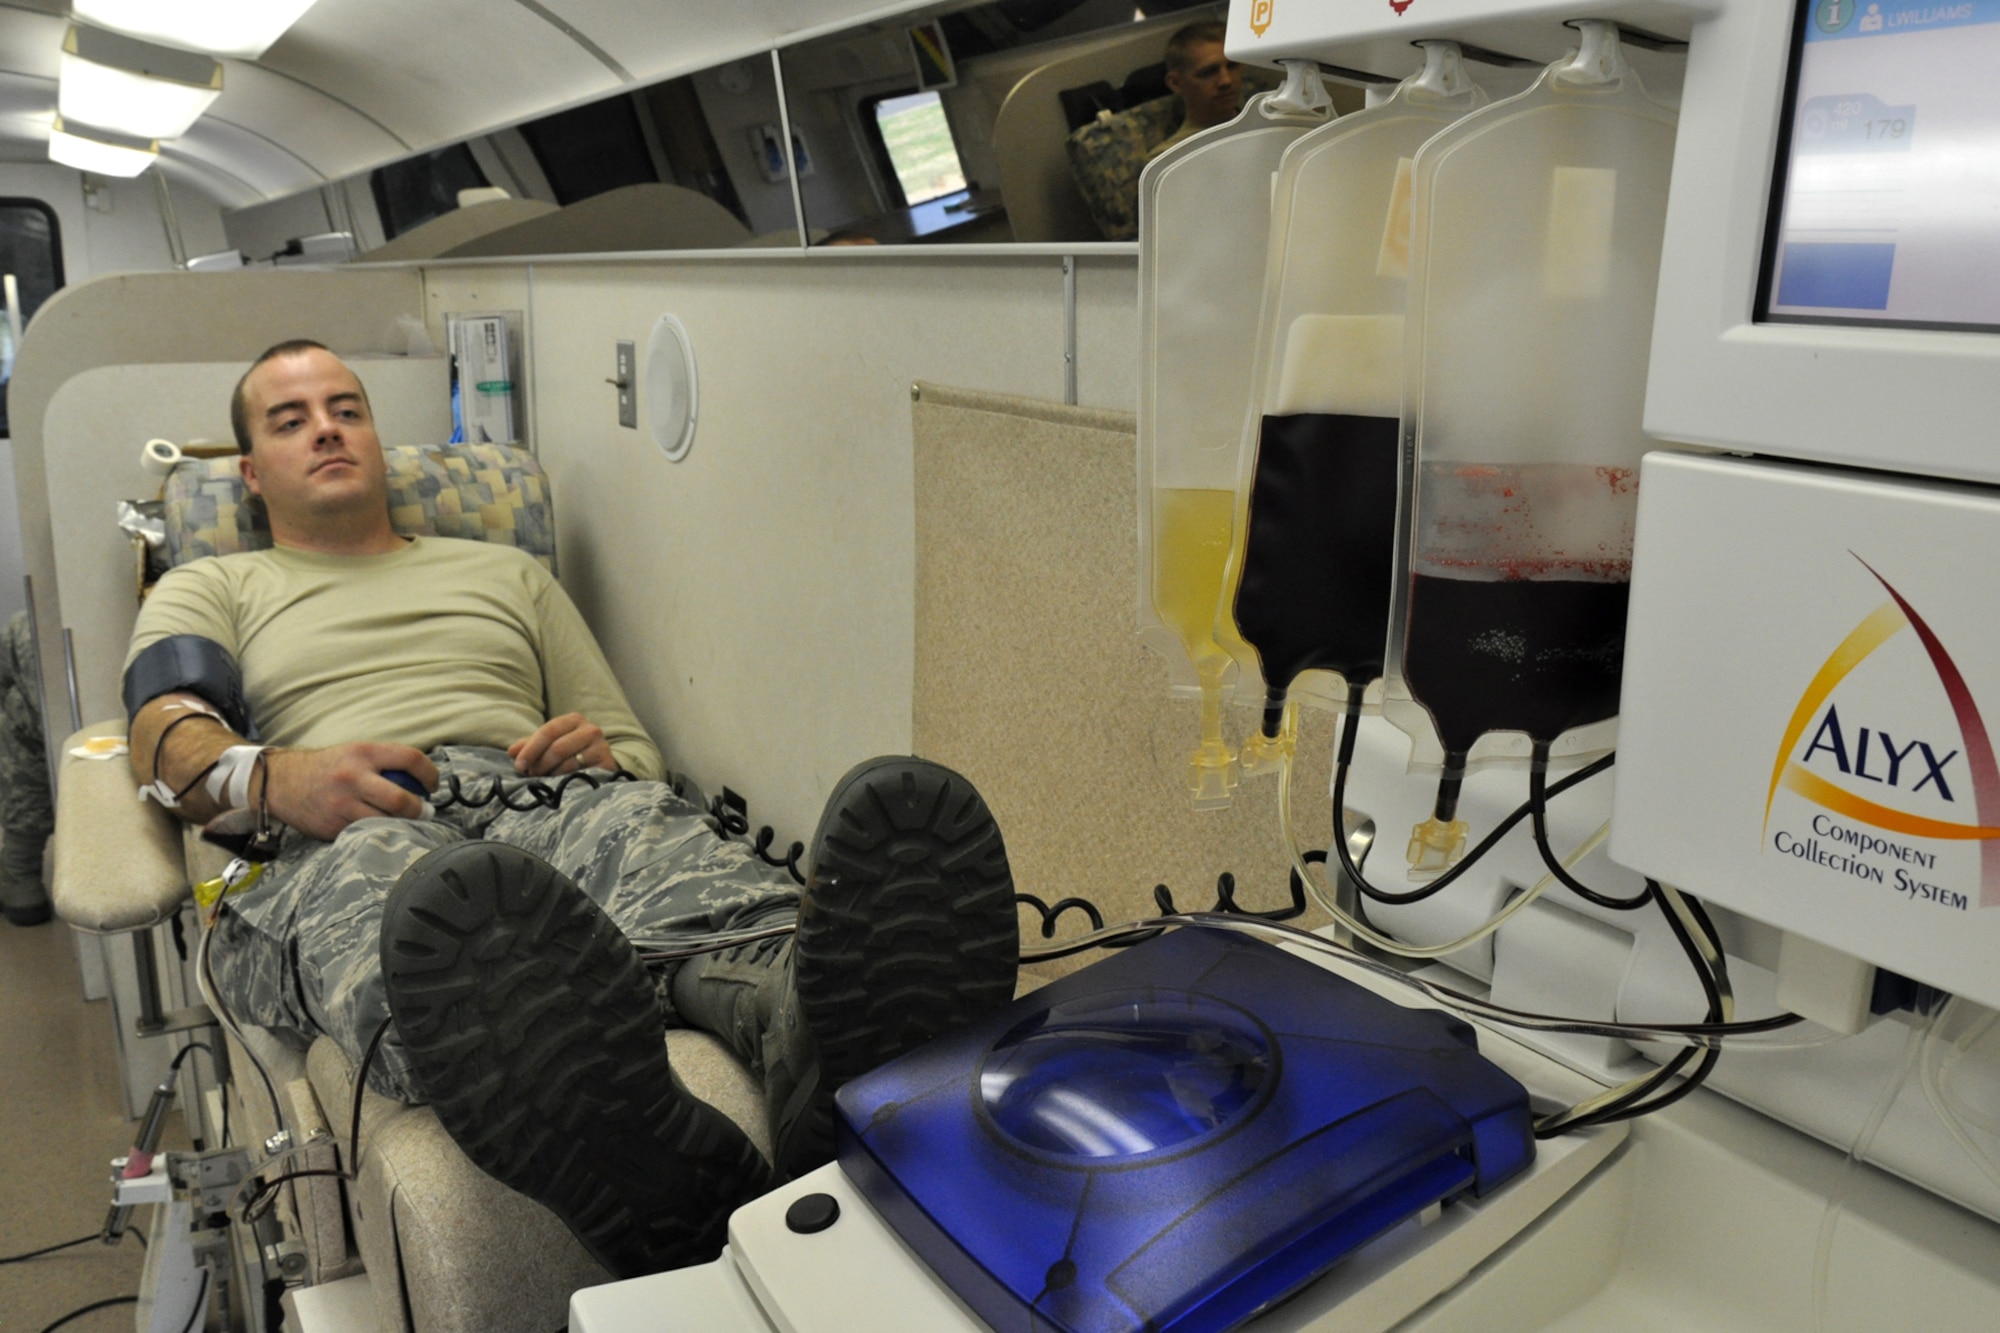 Tech. Sgt. David Walker, vehicle maintenance mechanic, 917th Logistics Readiness Squadron, has blood drawn in the LifeShare Blood Centers’ donor bus during the 917th Wing Blood Drive in the course of the Unit Training Assembly weekend at Barksdale Air Force Base, La., Dec. 4, 2010. The mission of LifeShare Blood Centers is to provide quality blood, blood components and related services for use by patients on an efficient cost effective basis. The 917th Wing takes pride in supporting the community in which they serve by donating blood. Together, we save lives! For information about donating blood to assist your community or family, contact: www.lifesharedonorclub.org or www.lifeshare.org. (U.S. Air Force photo /Tech. Sgt. Jeff Walston)